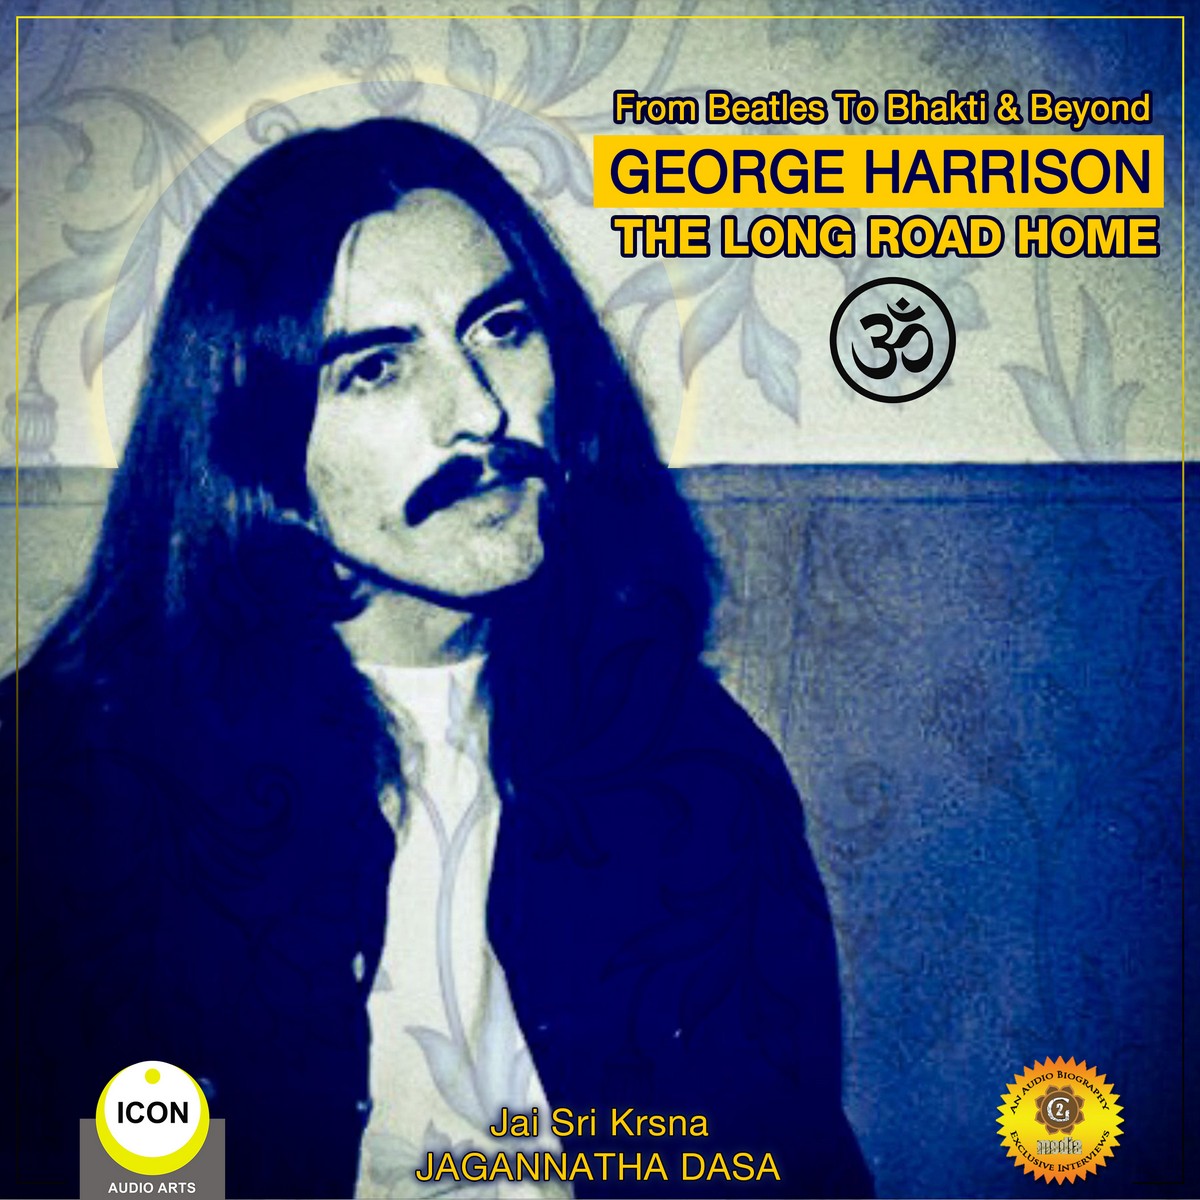 From Beatles To Bhakti & Beyond George Harrison – The Long Road Home